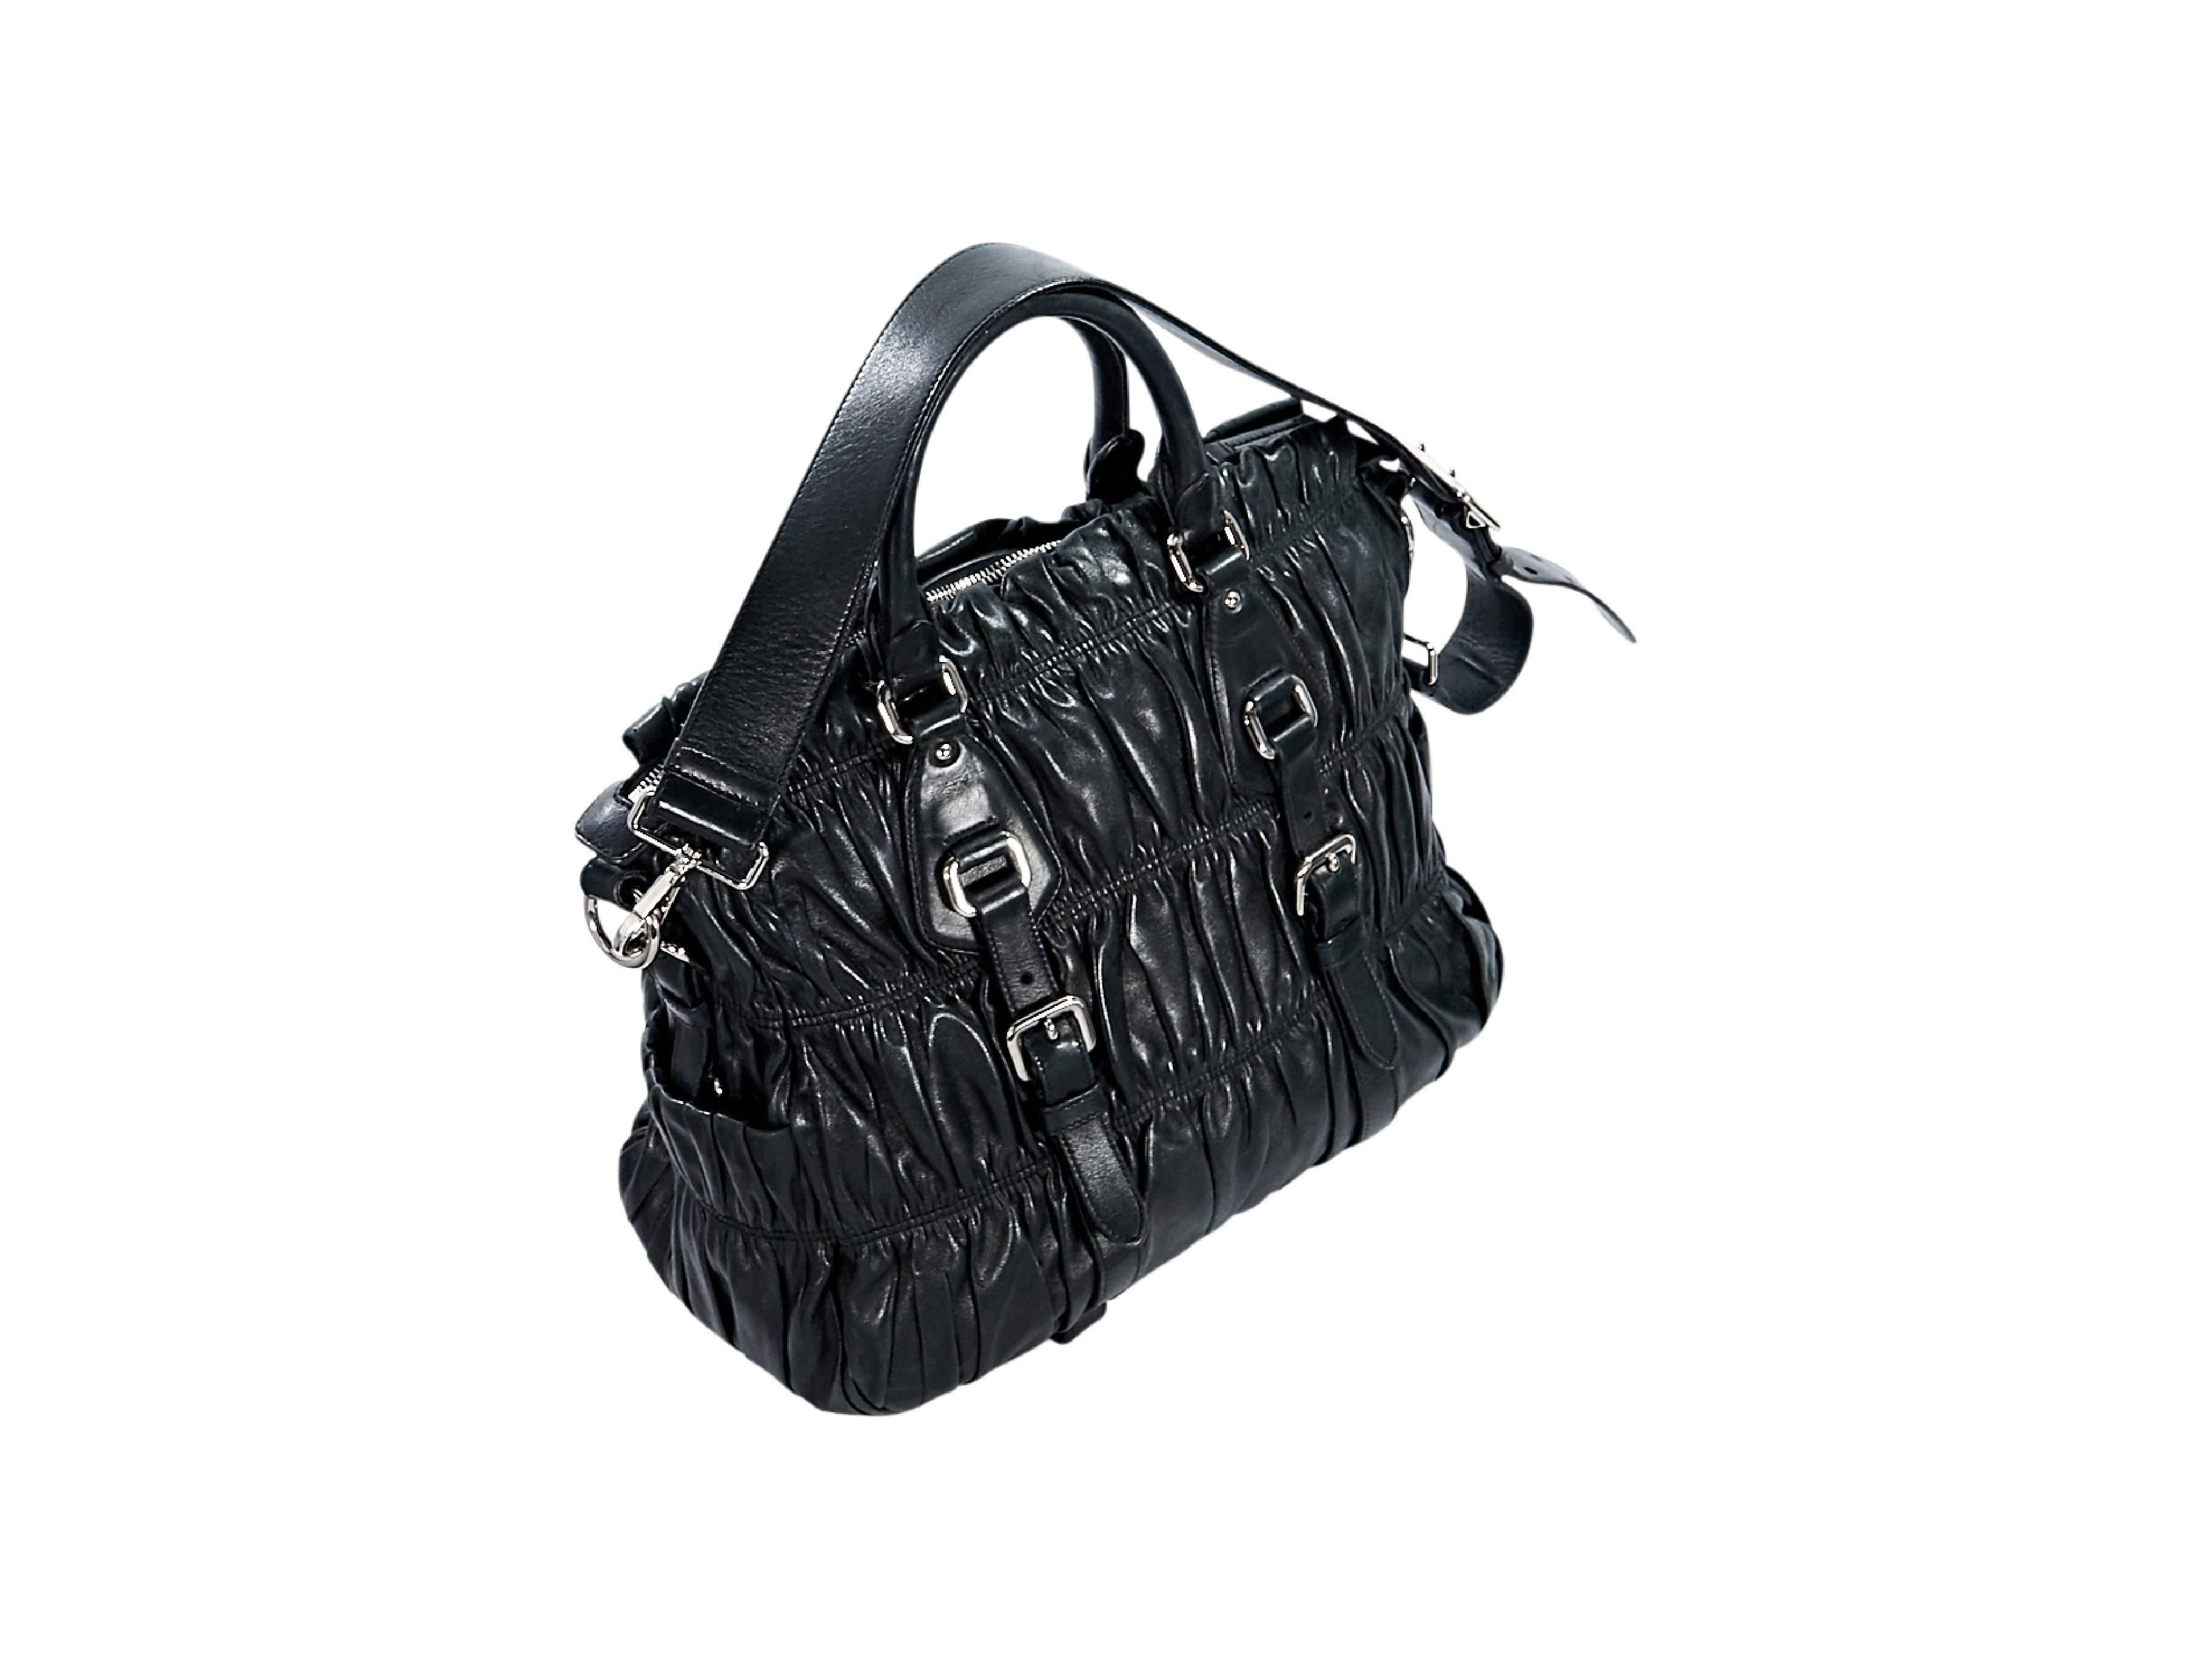 Product details:  Black nappa leather gaufre satchel by Prada.  Dual carry handles.  Detachable, adjustable shoulder strap.  Top zip closure.  Lined interior with inner zip and slide pockets.  Silvertone hardware. 
Condition: Pre-owned. Very